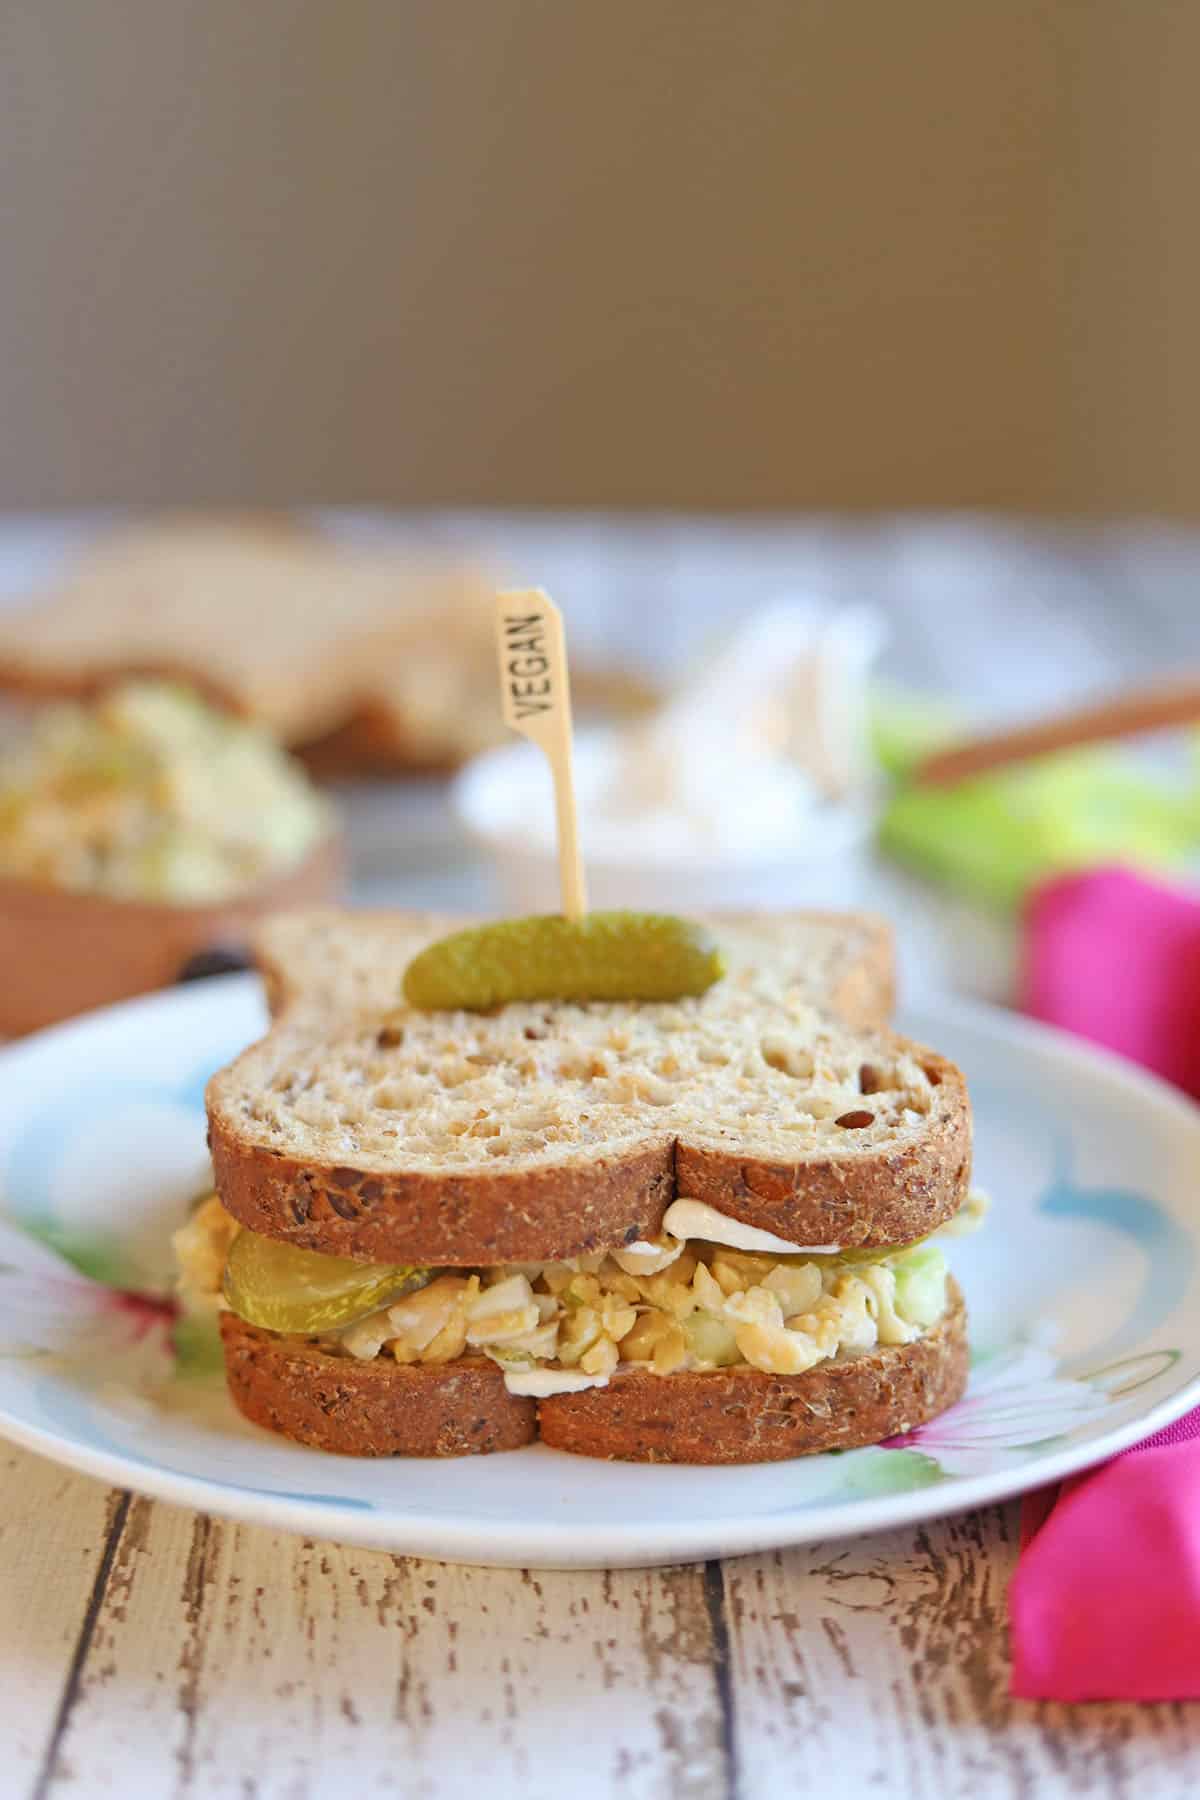 Chickpea salad on bread with vegan mayo and pickle.